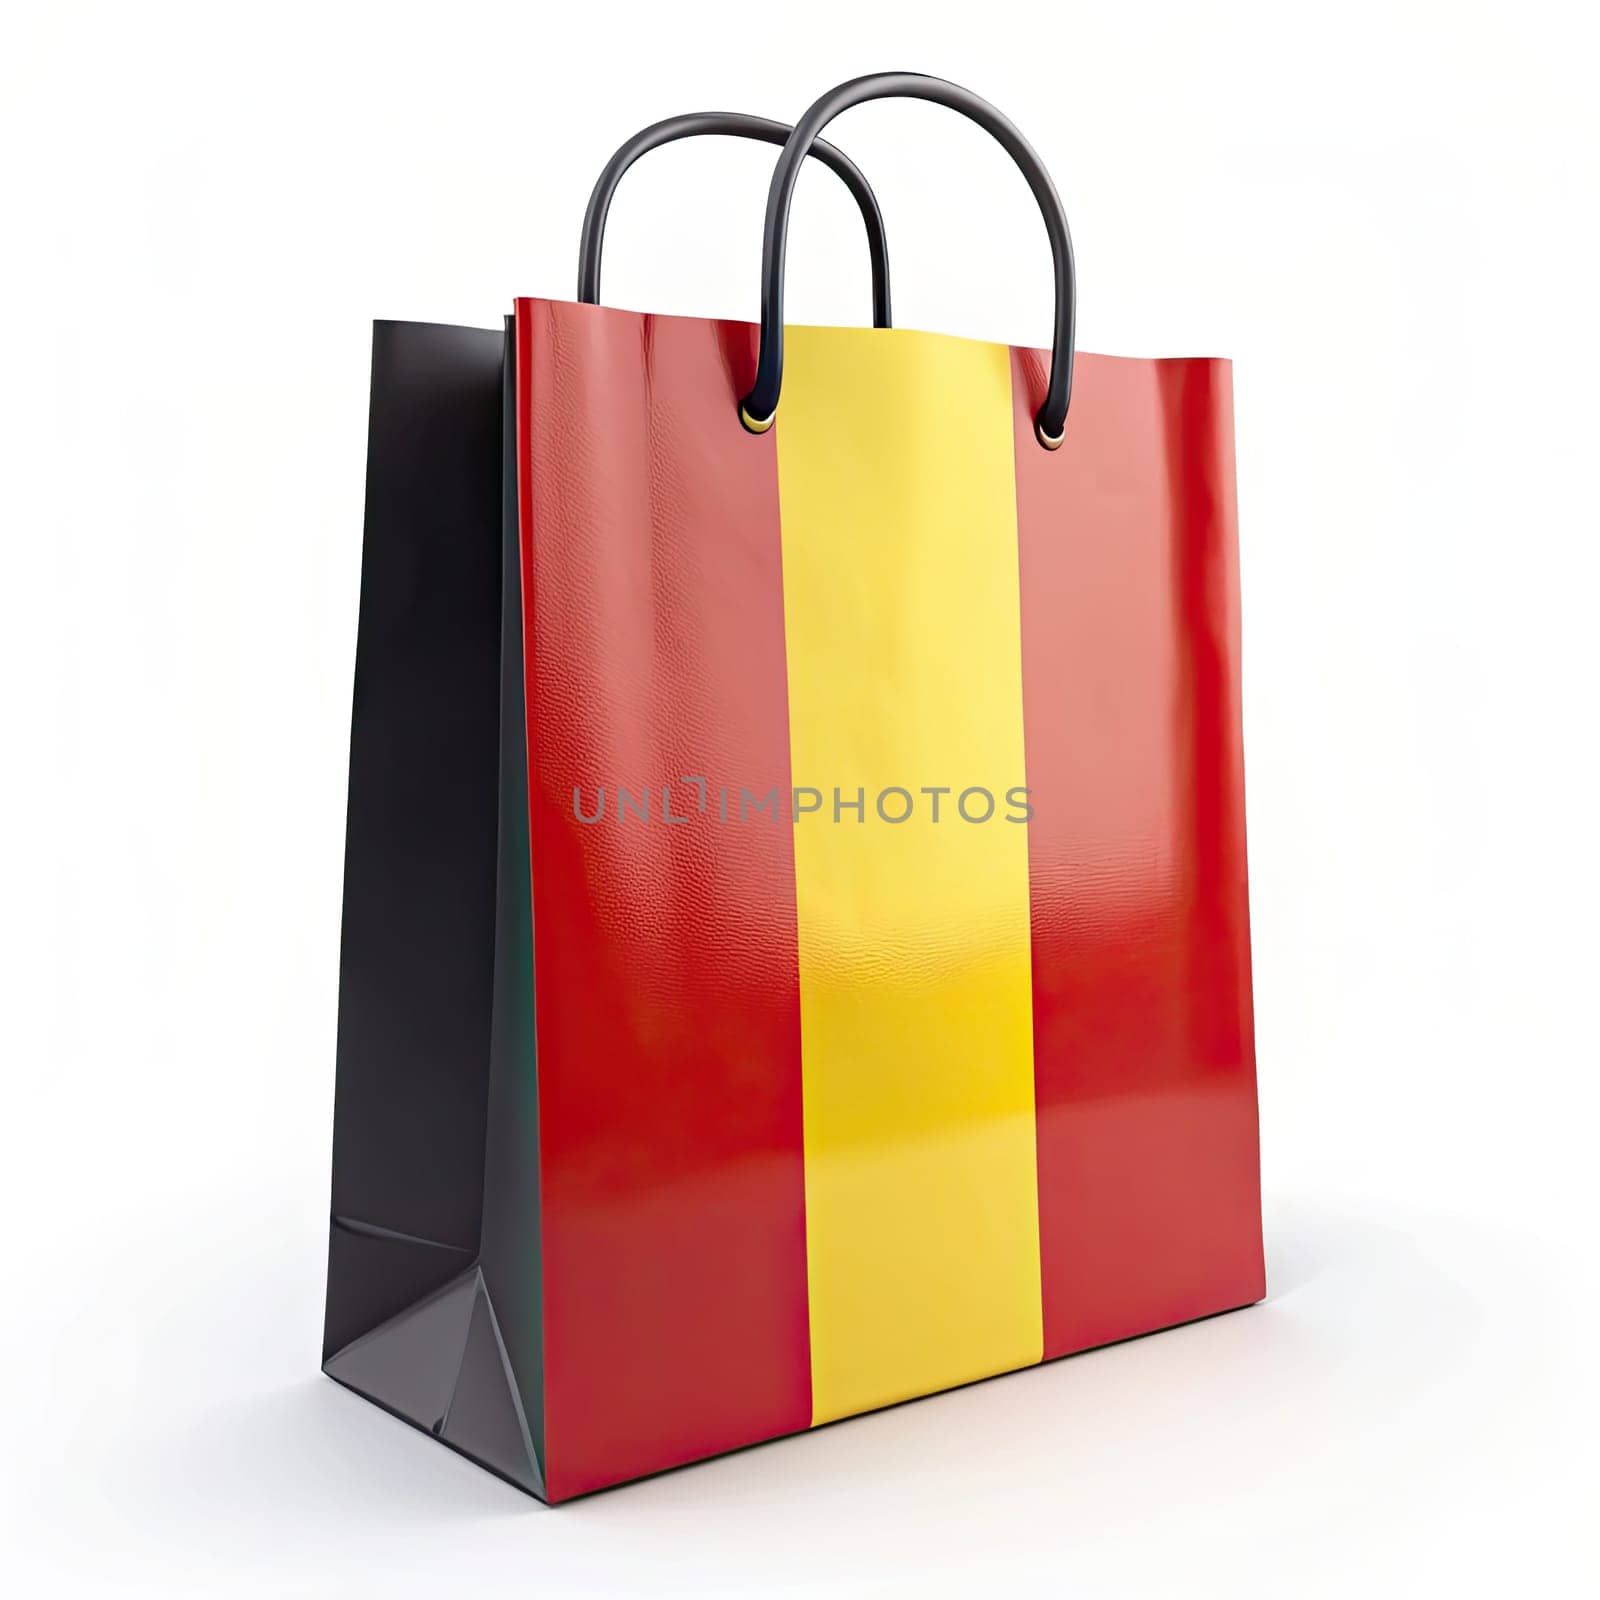 Belgium Flag Shopping Bag: Stylish Travel Accessory Against White Background. Premium Belgian Pride: Modern Flag-Inspired Tote Bag for Sustainable Fashionistas. Iconic Belgian Heritage: Durable Flag Shopping Bag for Trendy Outings. Chic Retail Therapy: Eco-Friendly Belgian Flag Carryall for Urban Fashion"